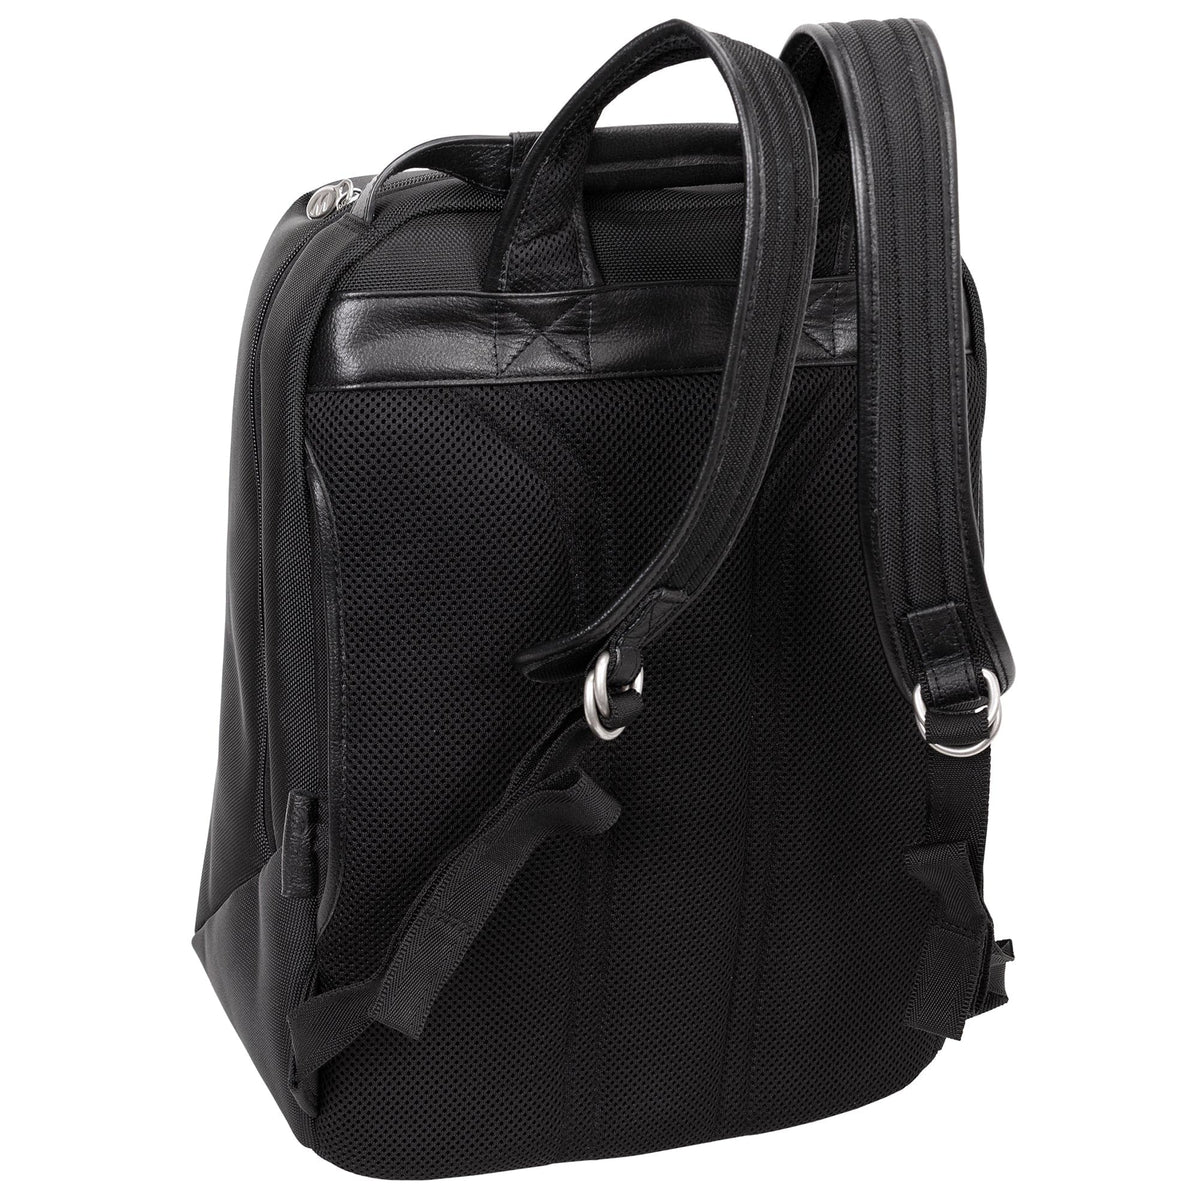 McKlein U Series Southshore 17" Carry-All Laptop and Tablet Overnight Nylon Backpack